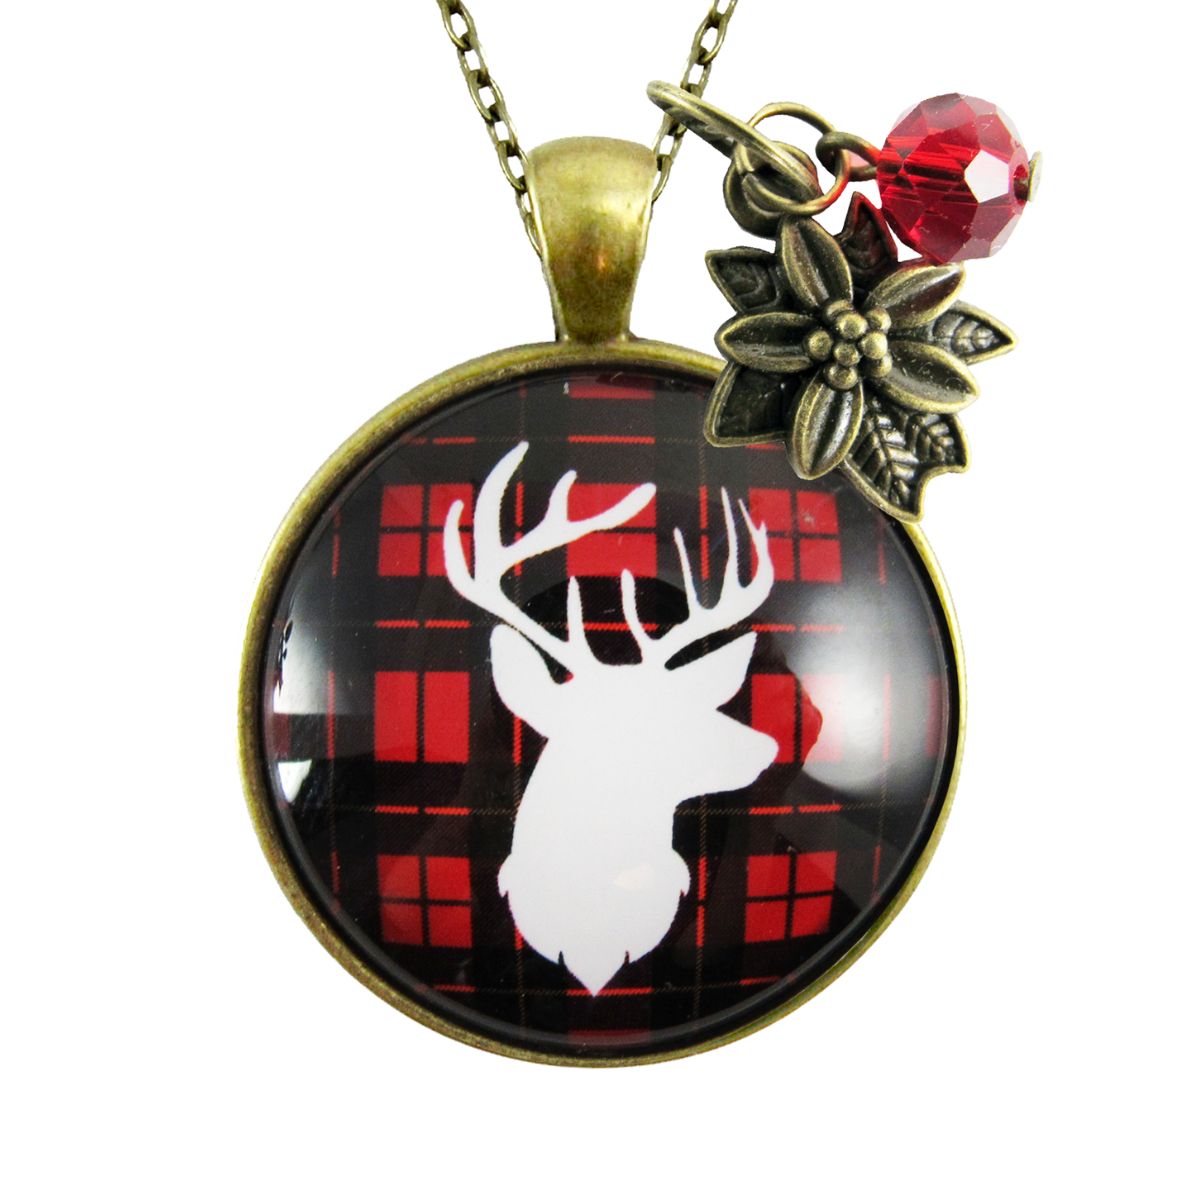 Deer Necklace Antlers Hunter Red Plaid Christmas Jewelry Holiday Gift  Necklace - Gutsy Goodness Handmade Jewelry